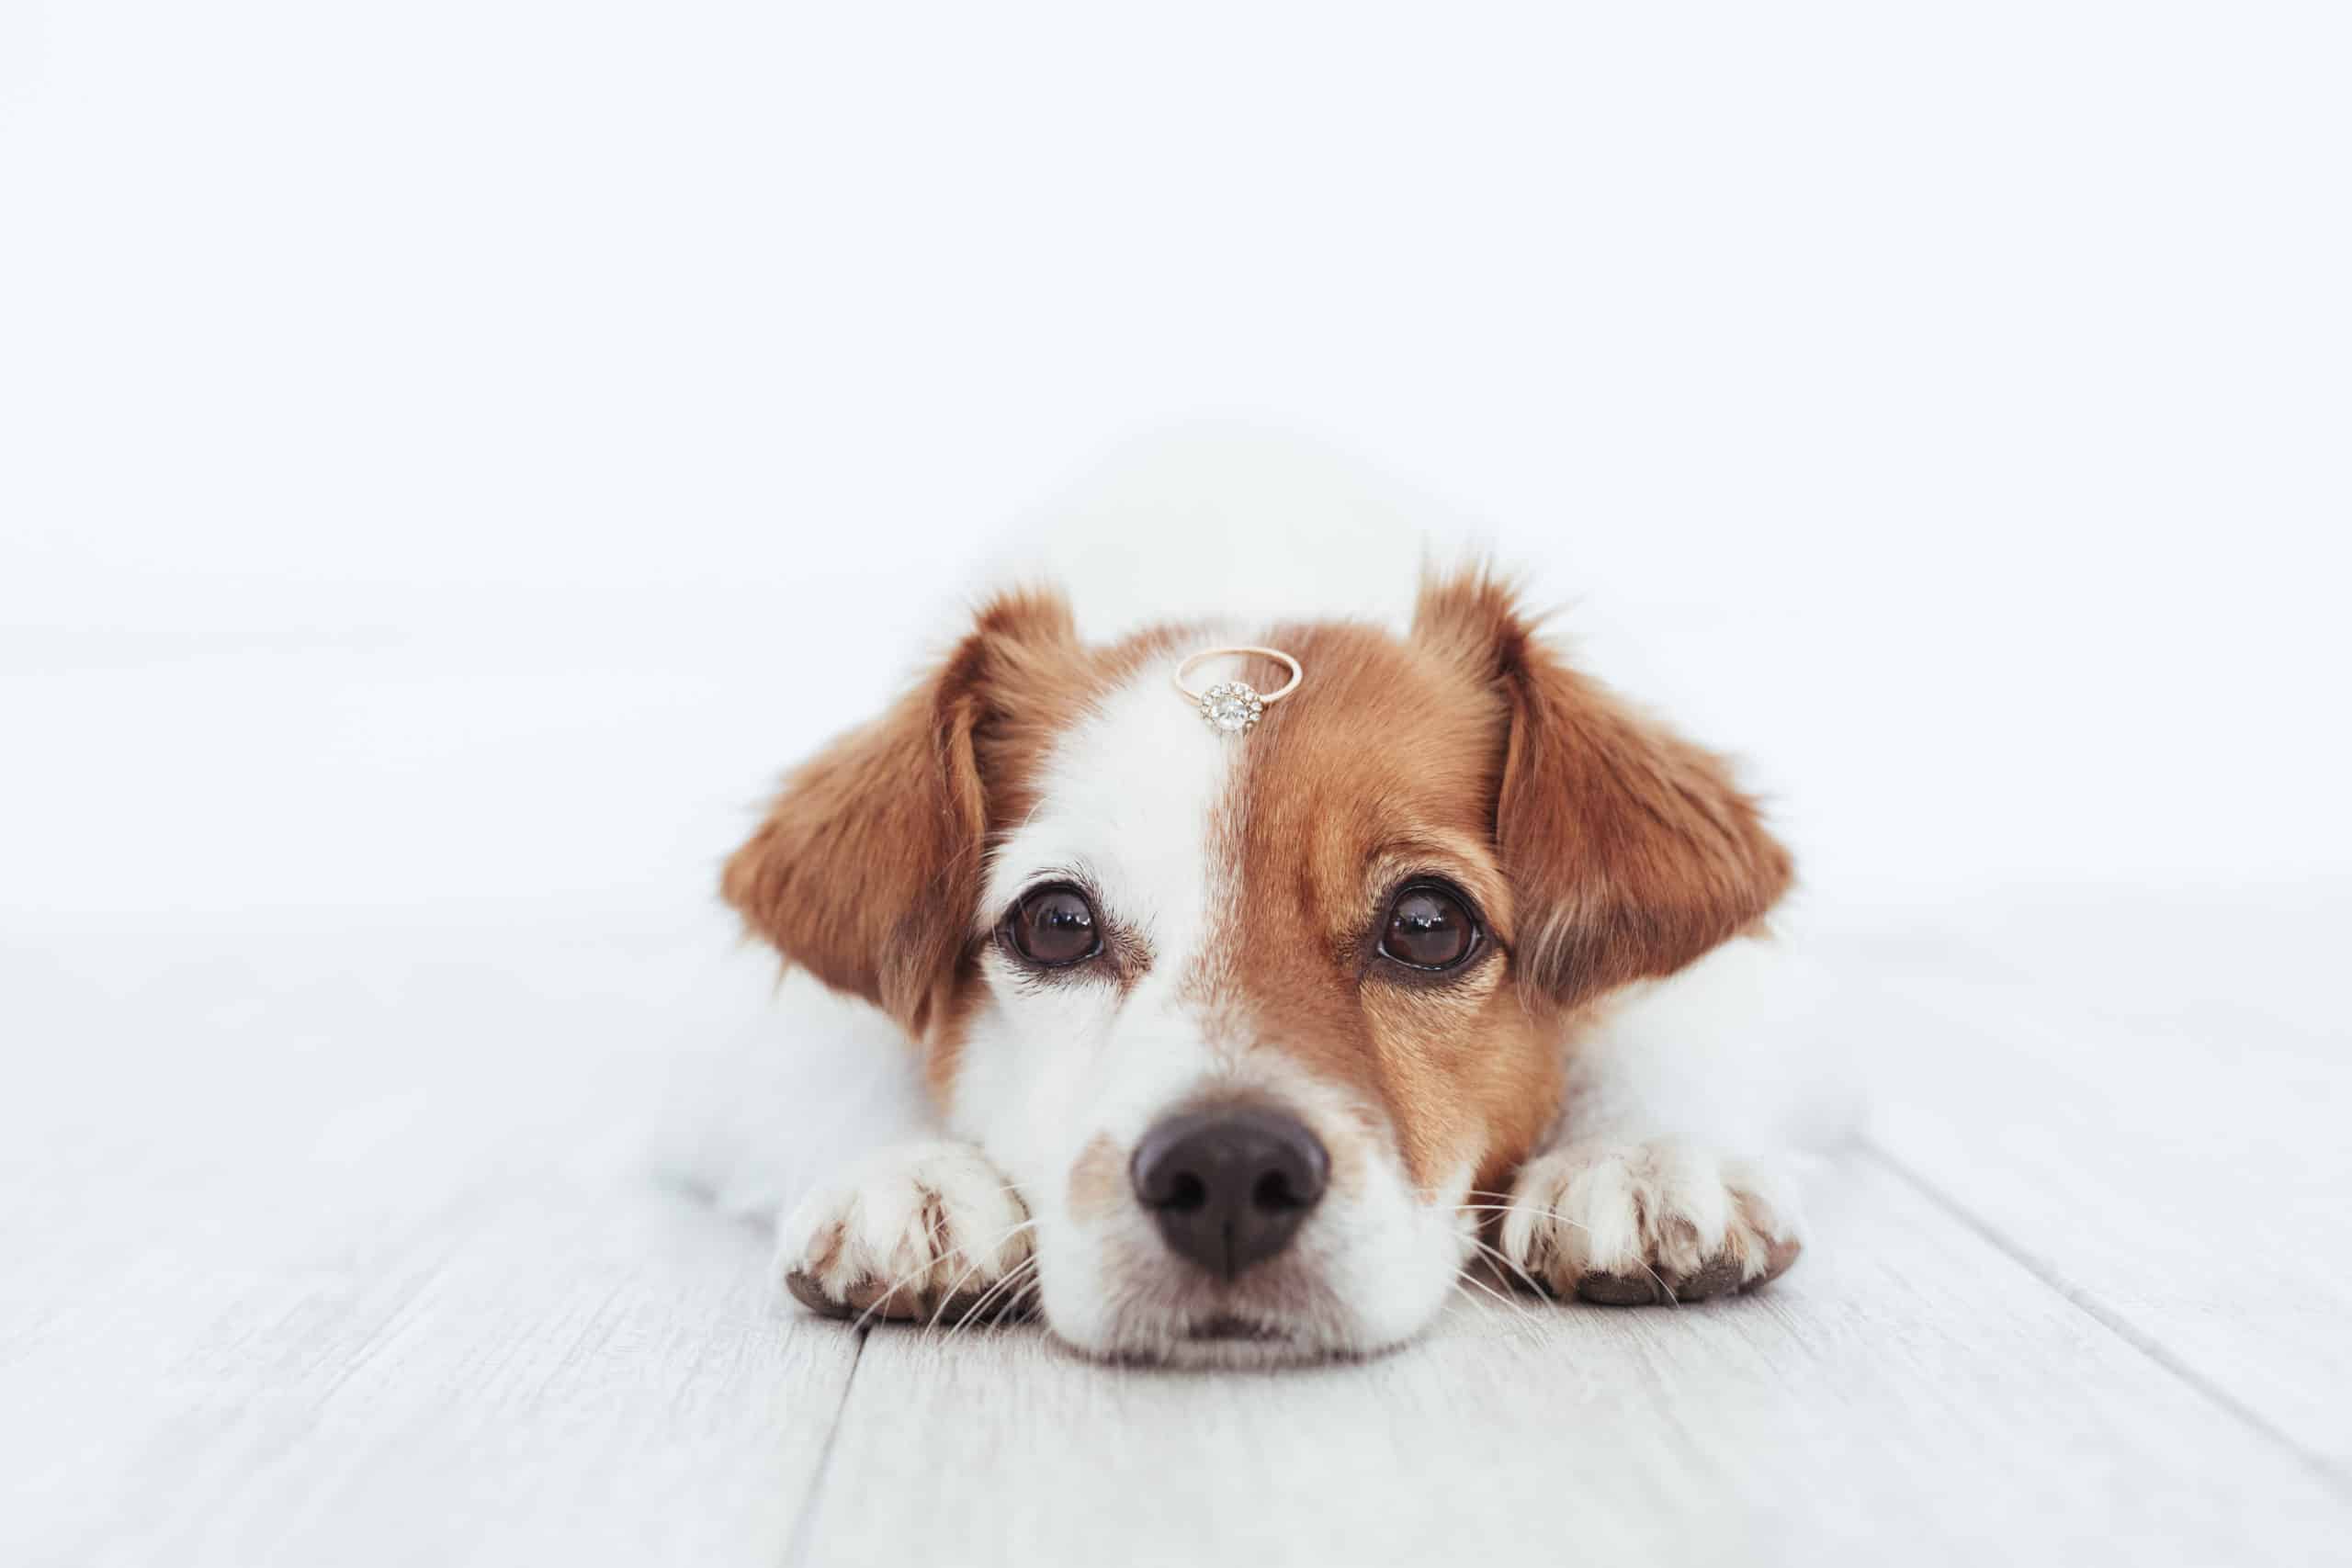 Why won’t my dog lay down after surgery?